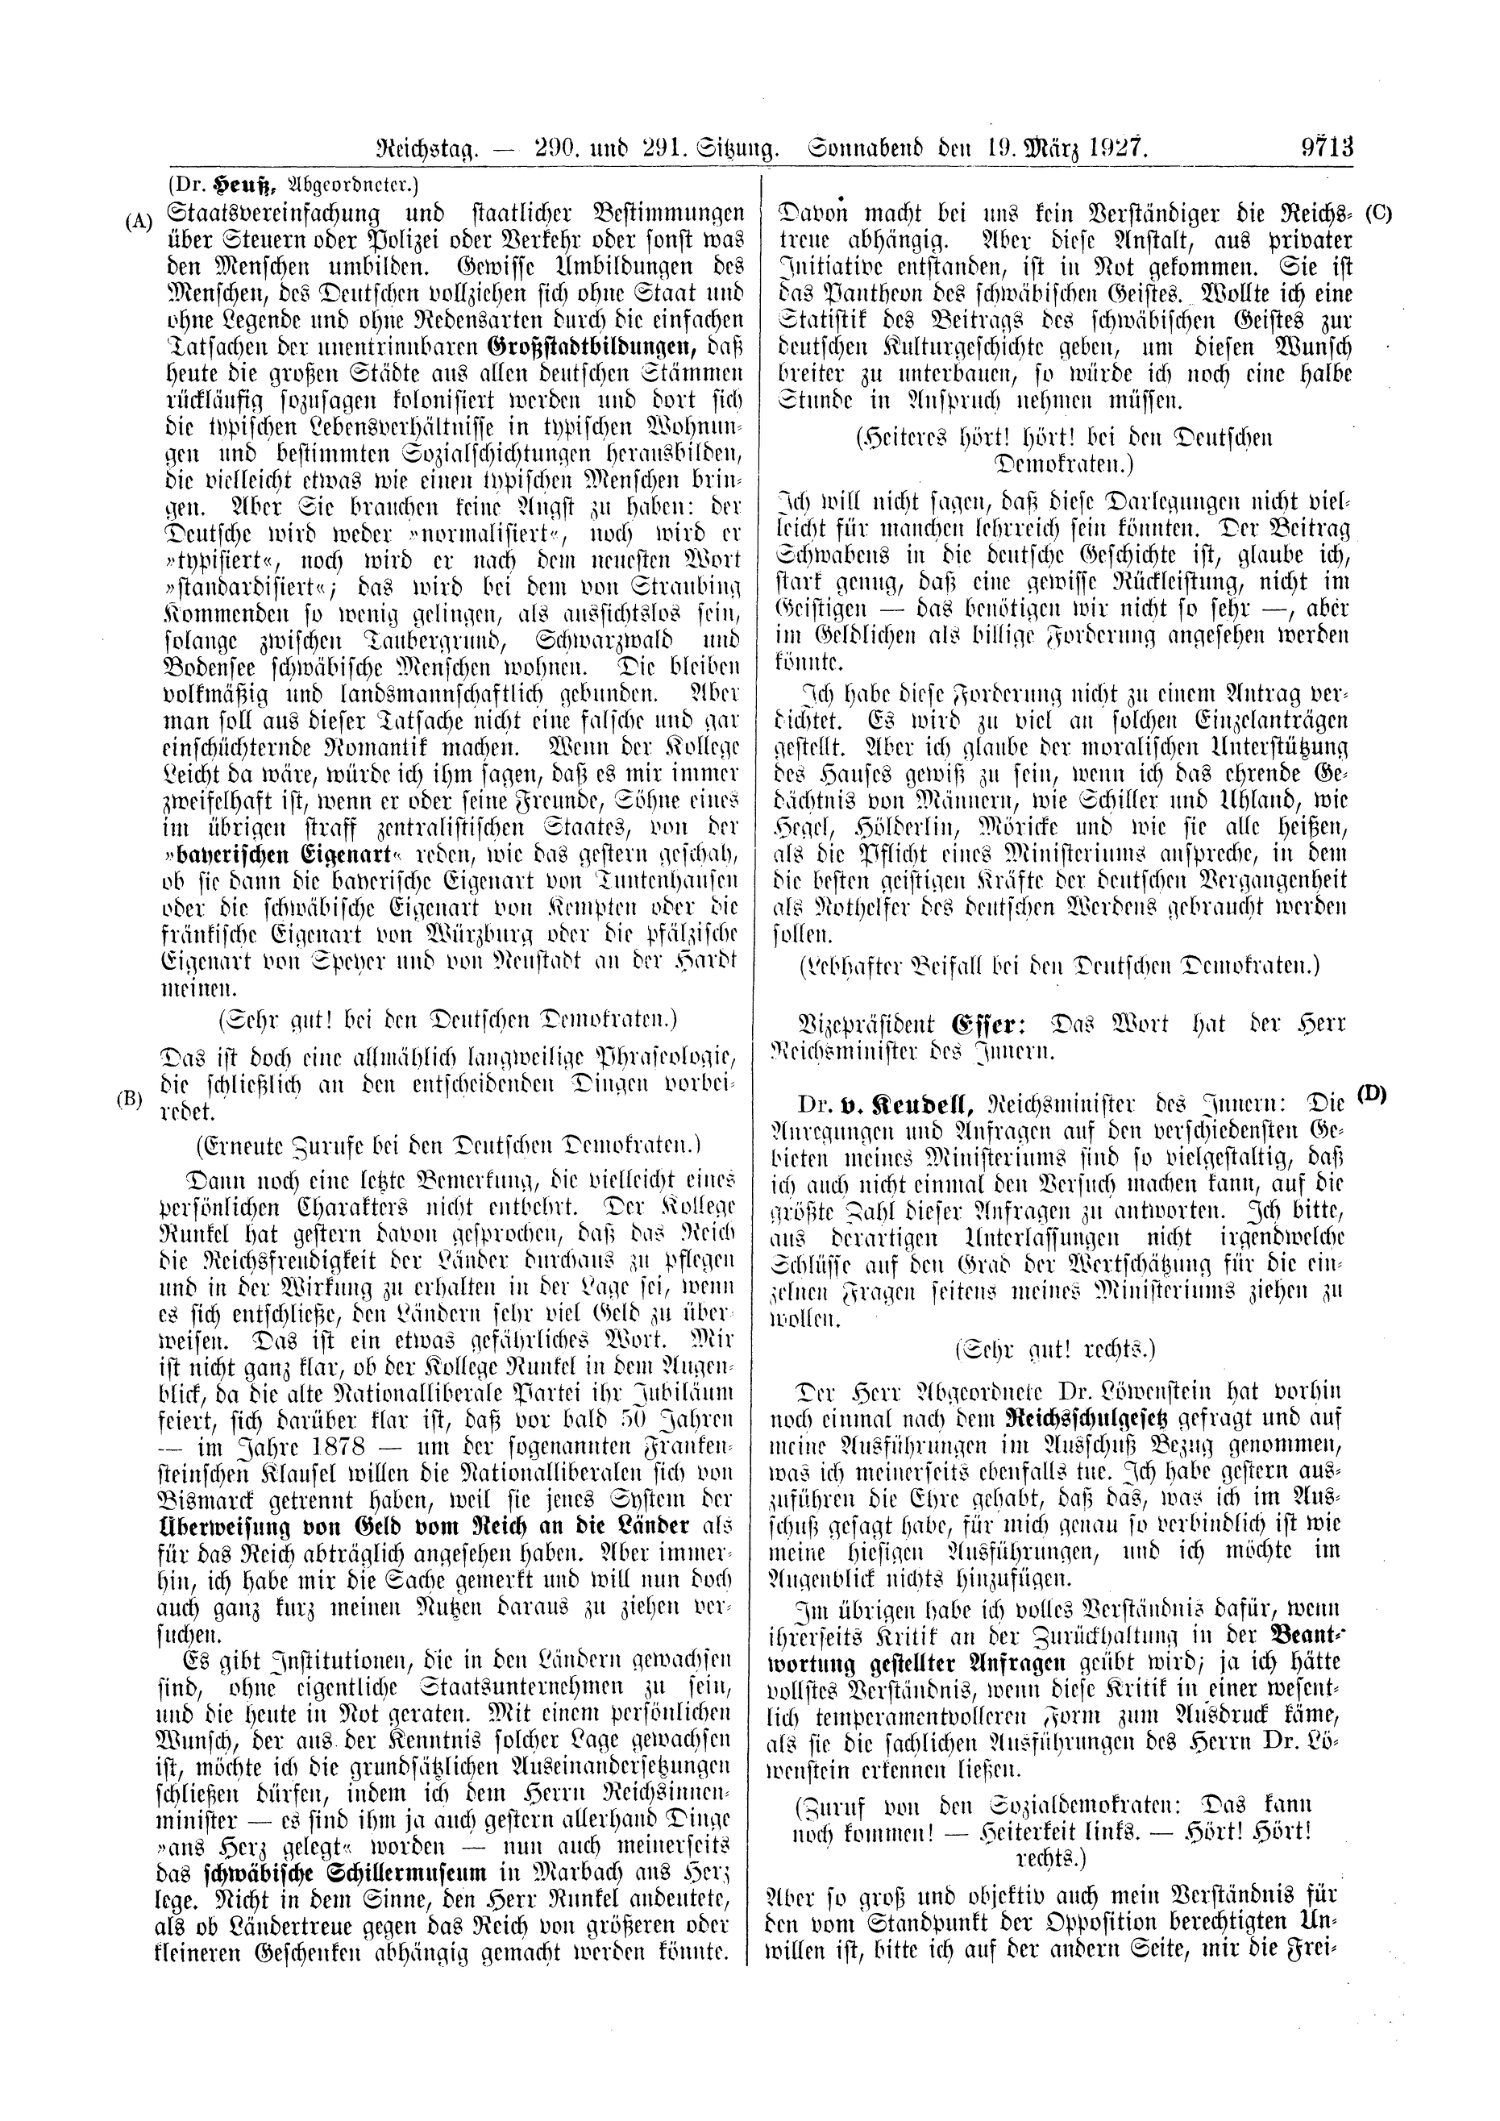 Scan of page 9713